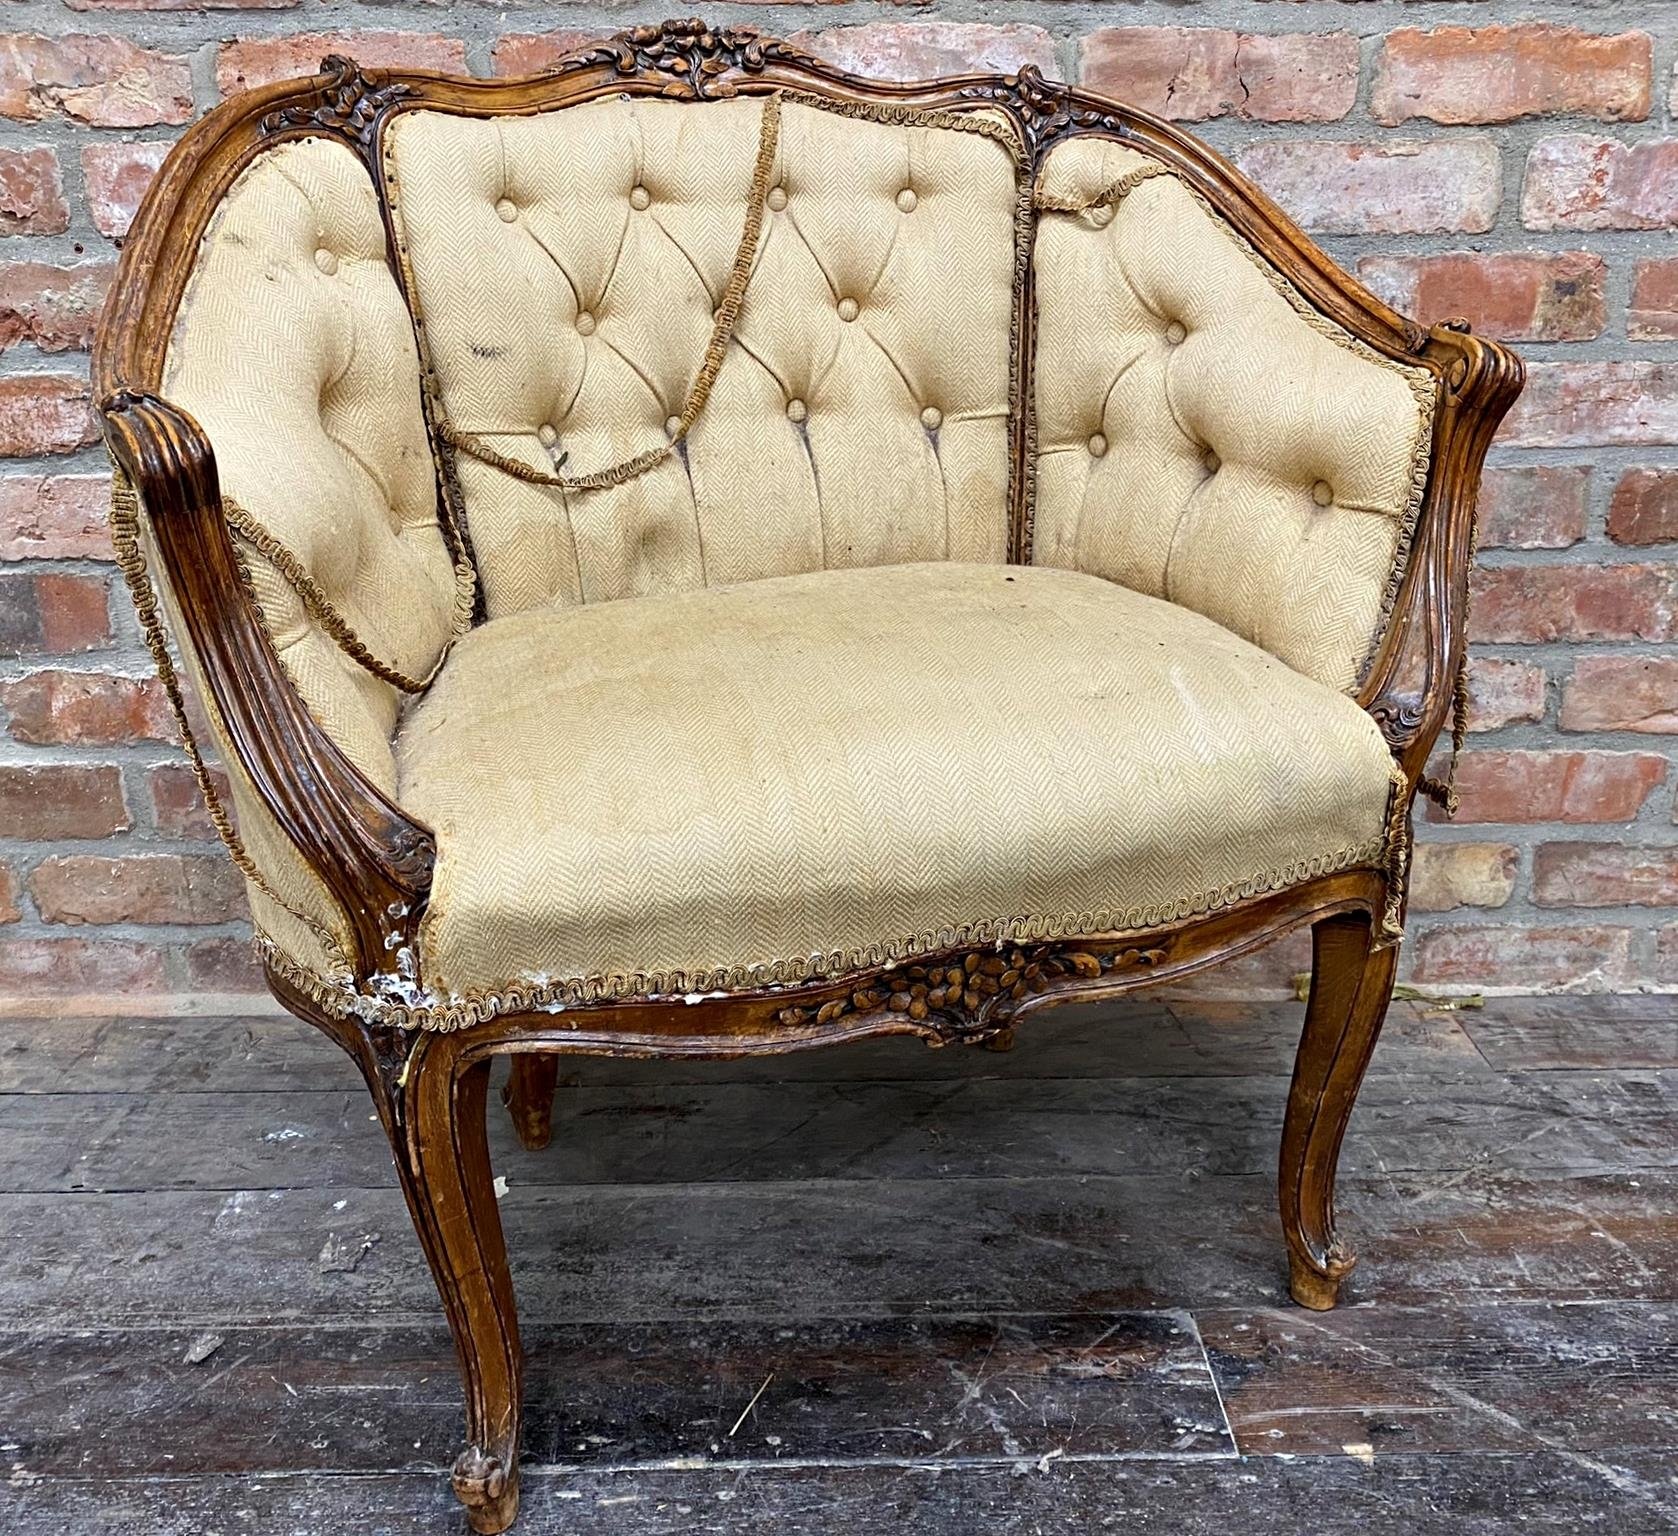 19th century French fauteuil salon chair with carved walnut framework, button back upholstery on